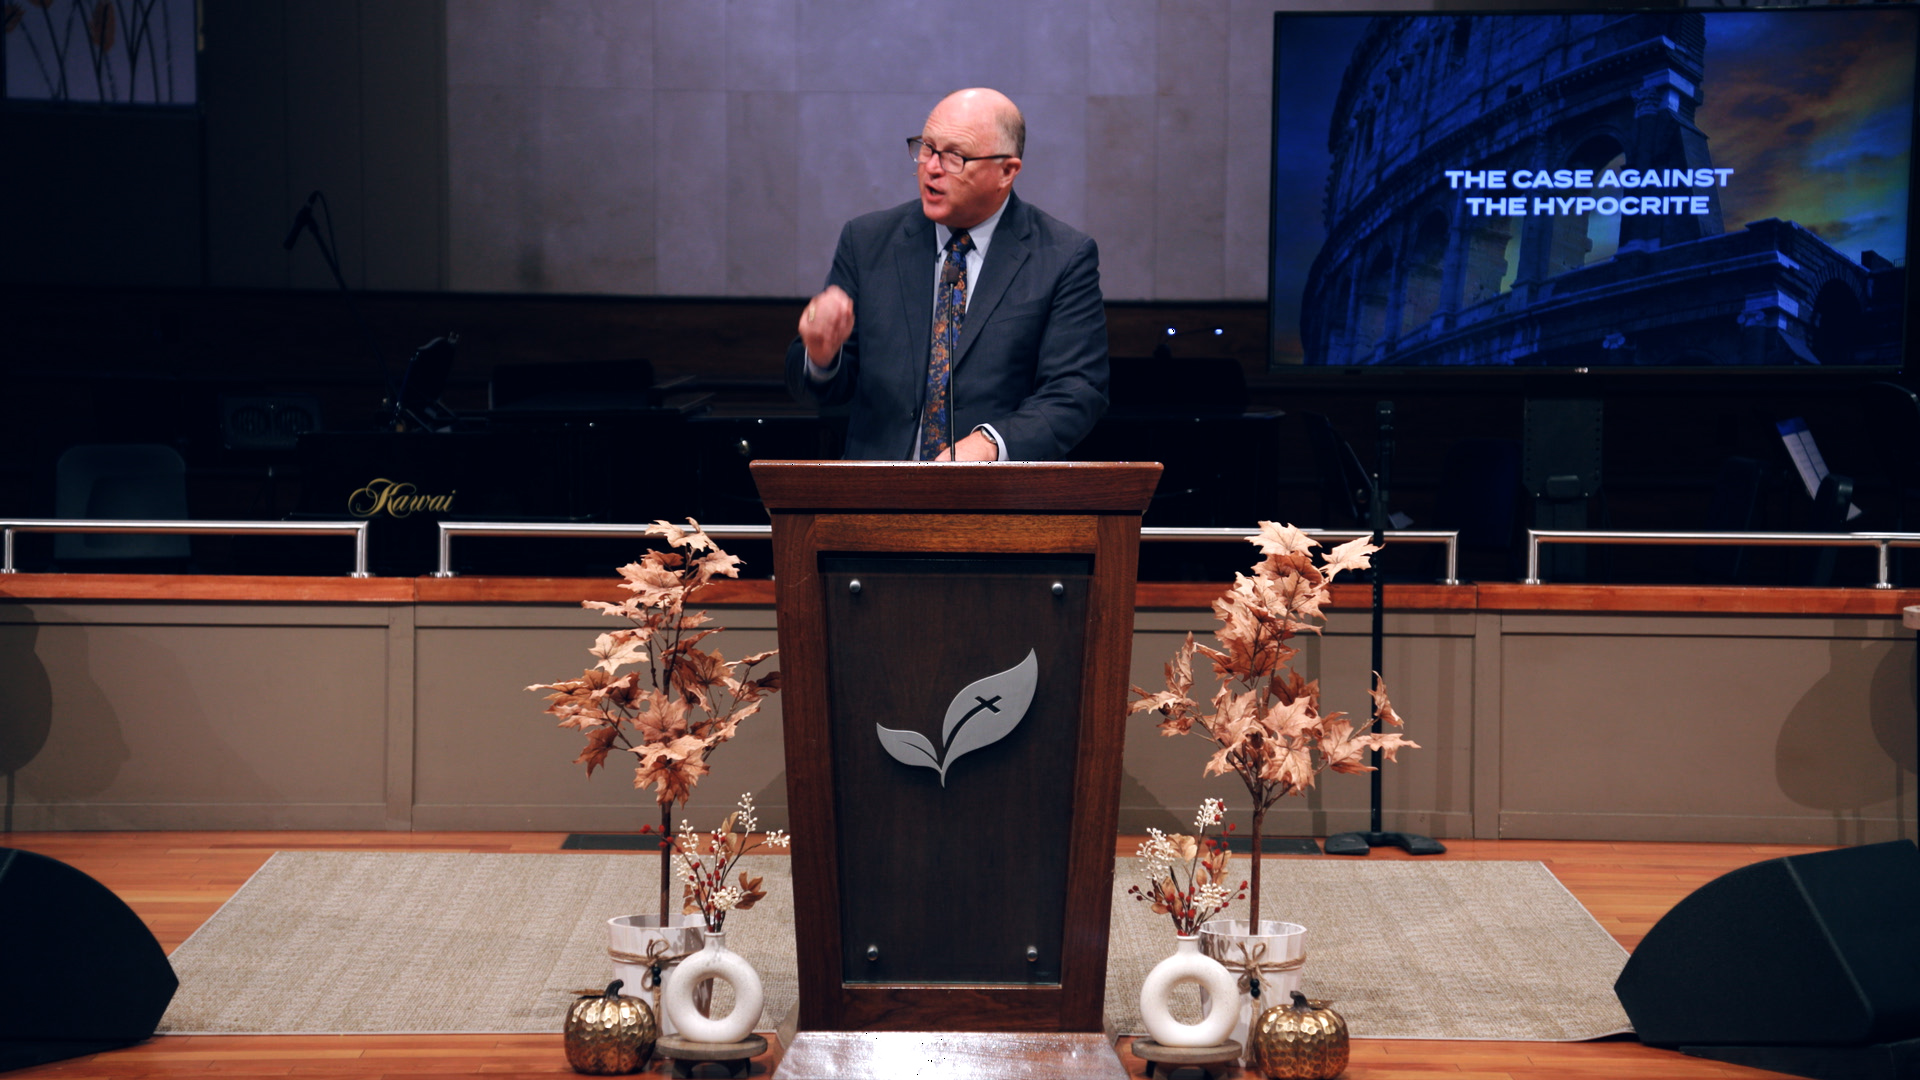 Pastor Paul Chappell: God's Justice